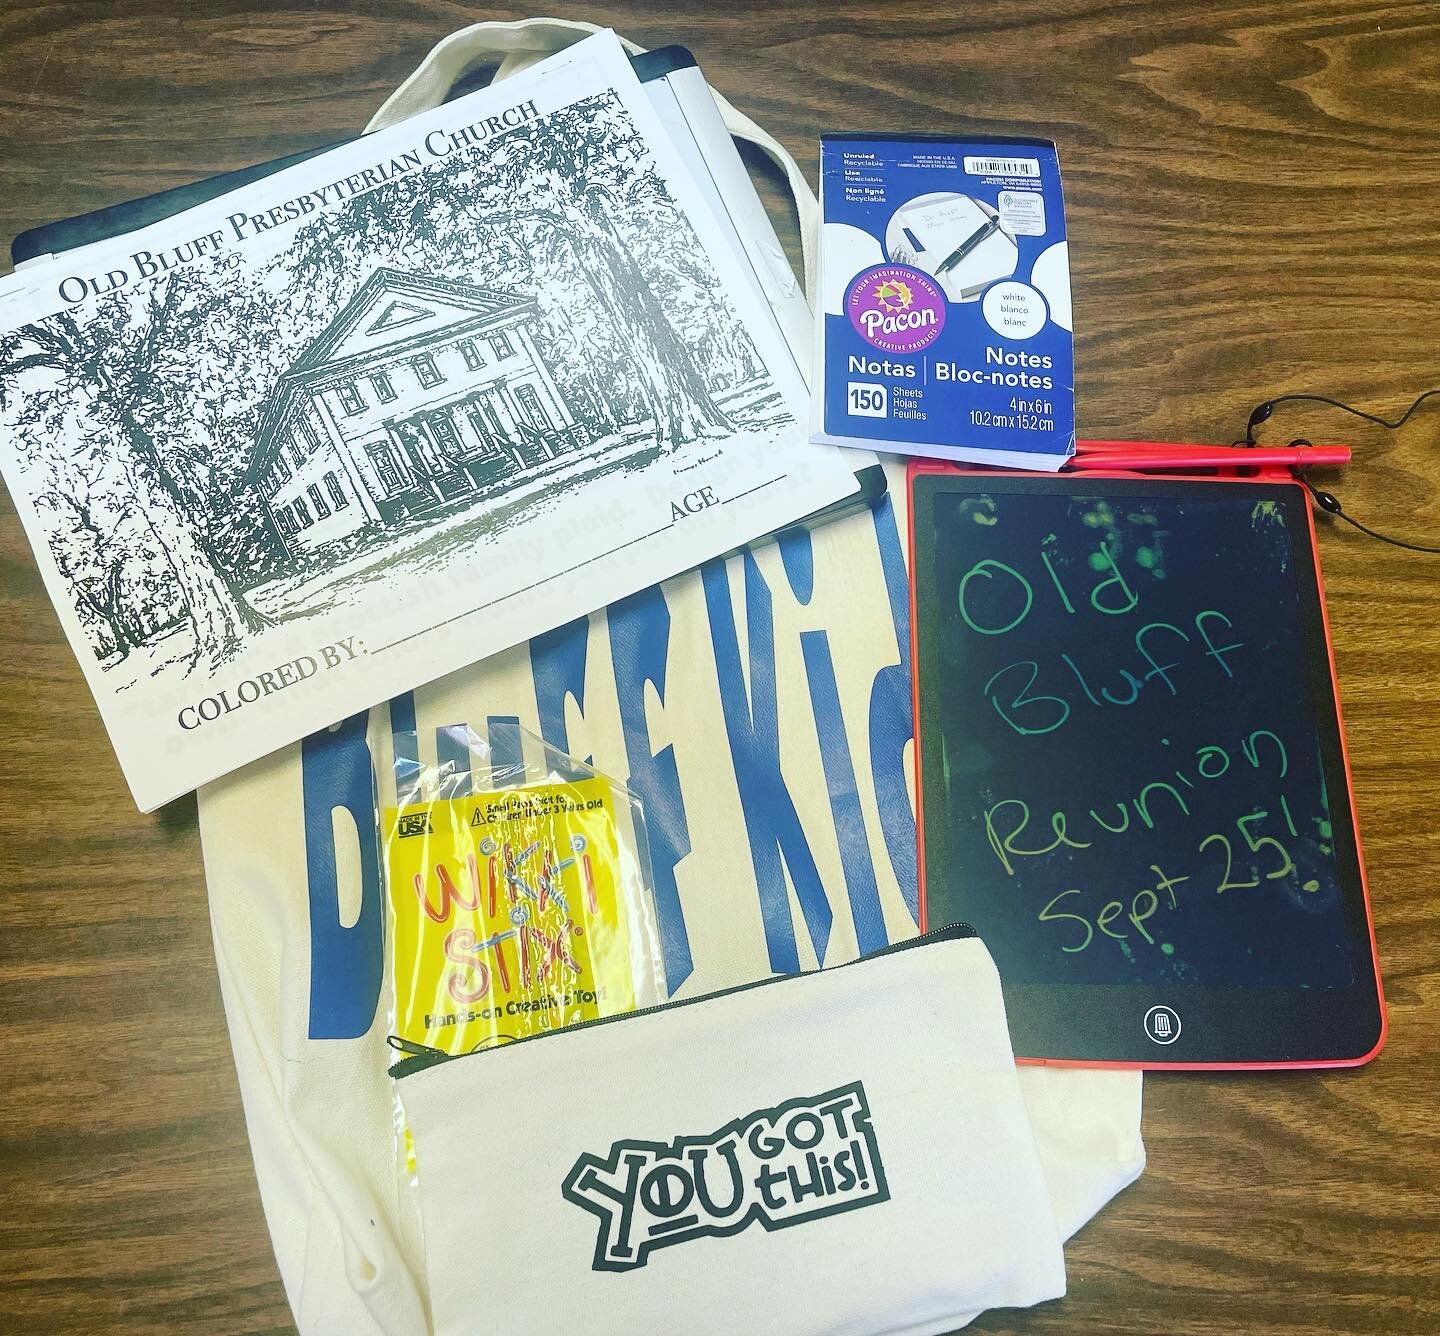 We&rsquo;ve updated the childrens worship bags just in time for the old bluff reunion! All are welcome this Sunday at 11 am, for our special service!